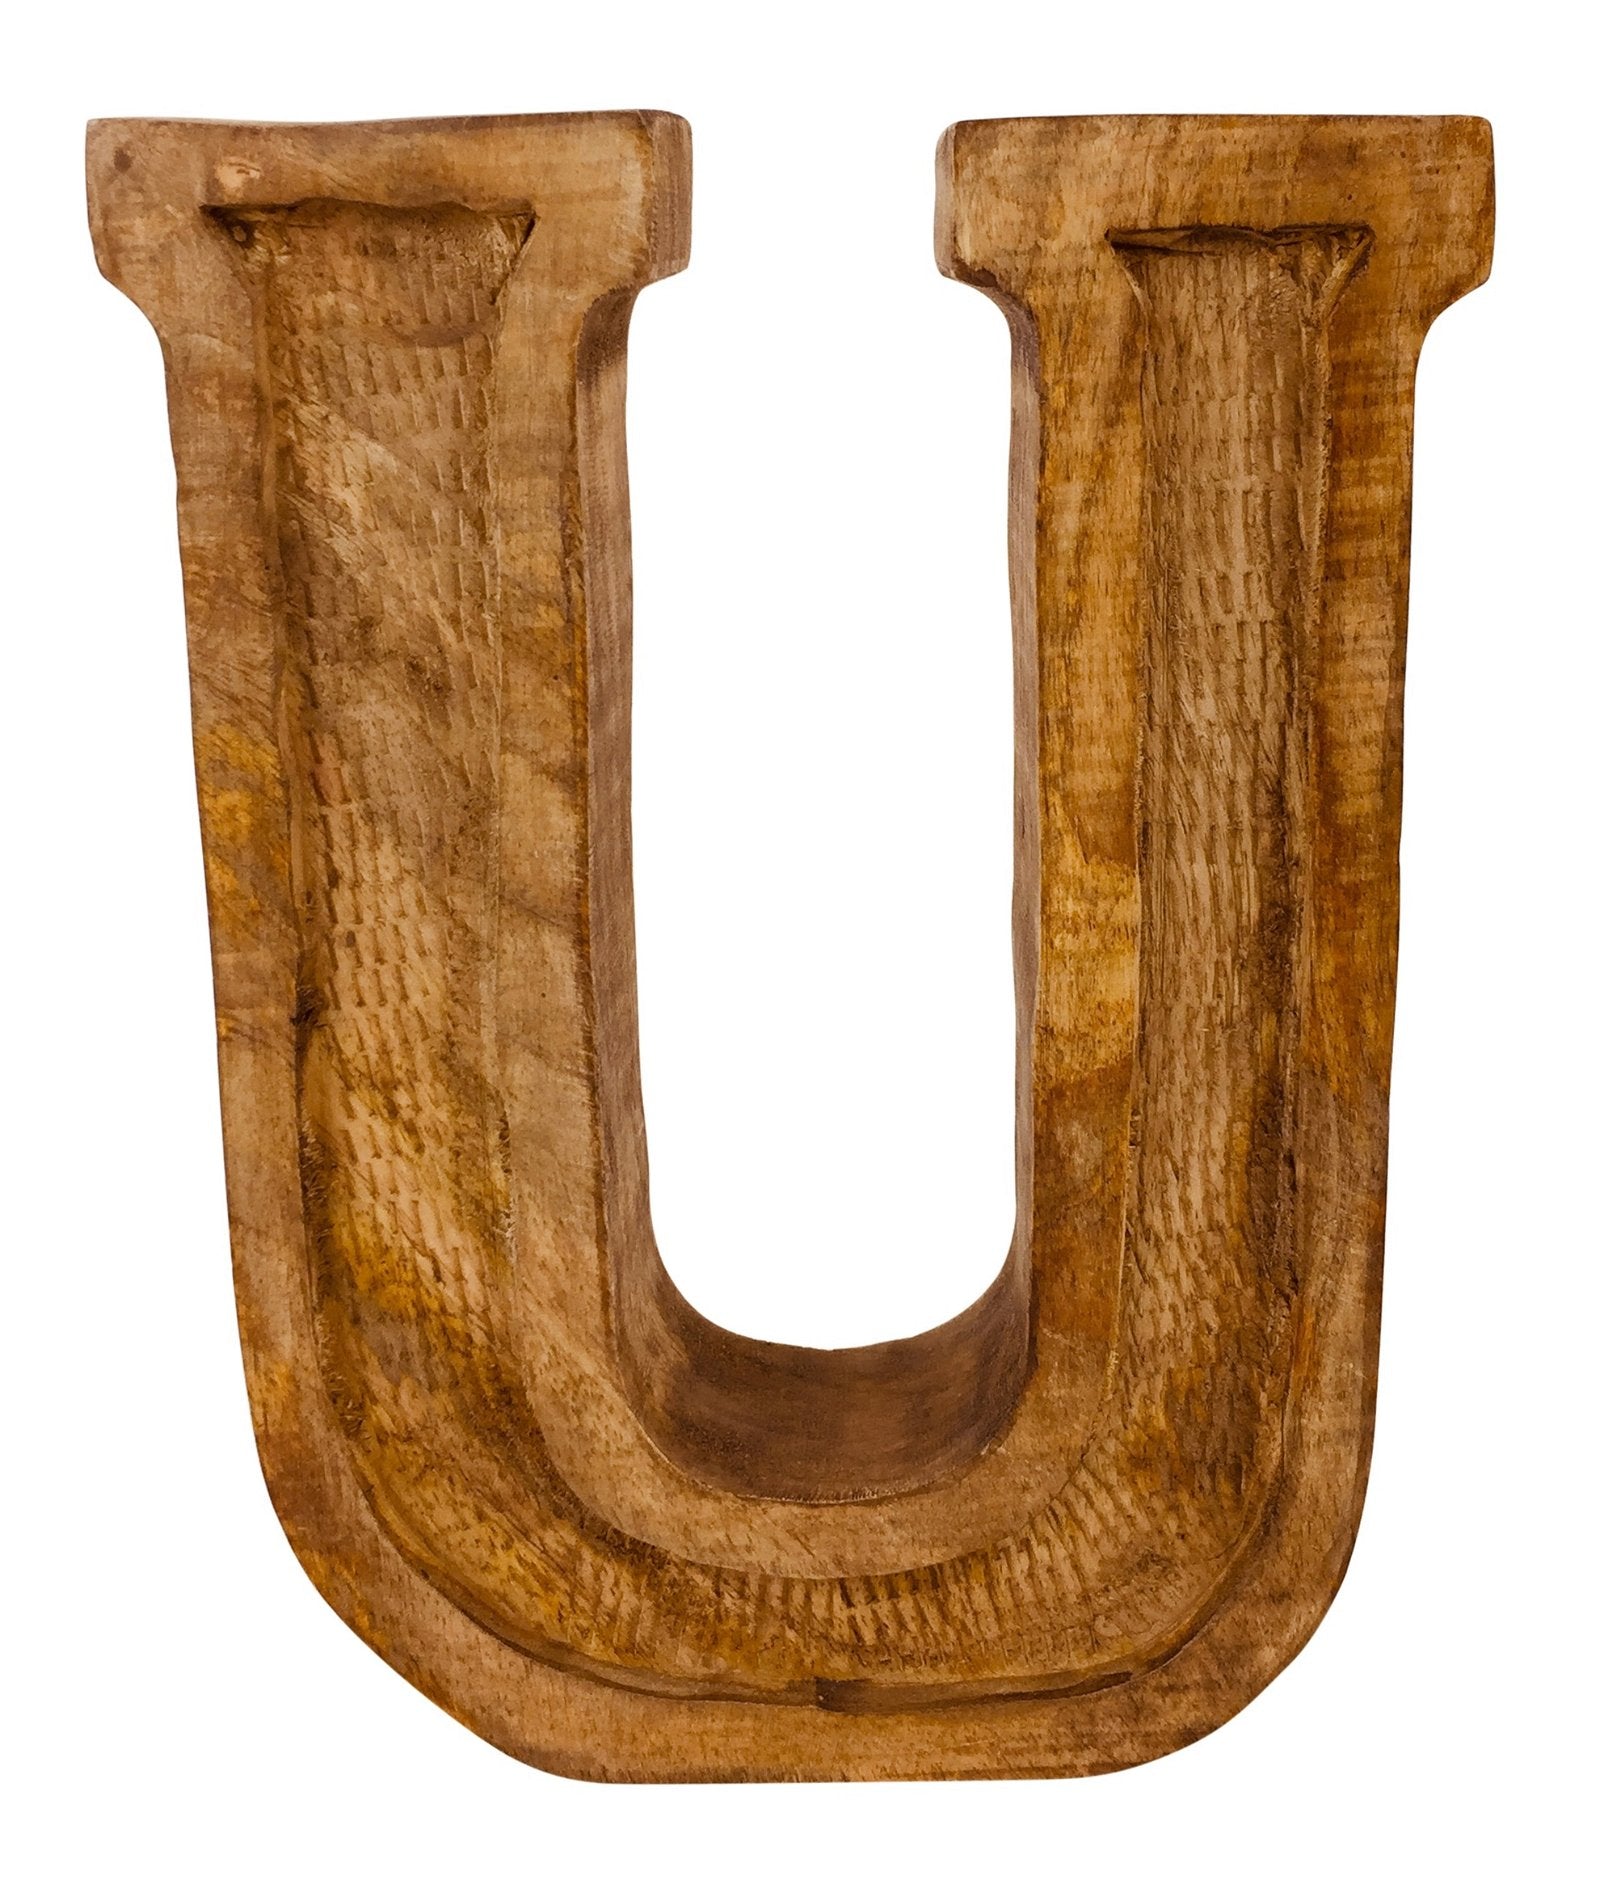 Hand Carved Wooden Embossed Letter U Willow and Wine